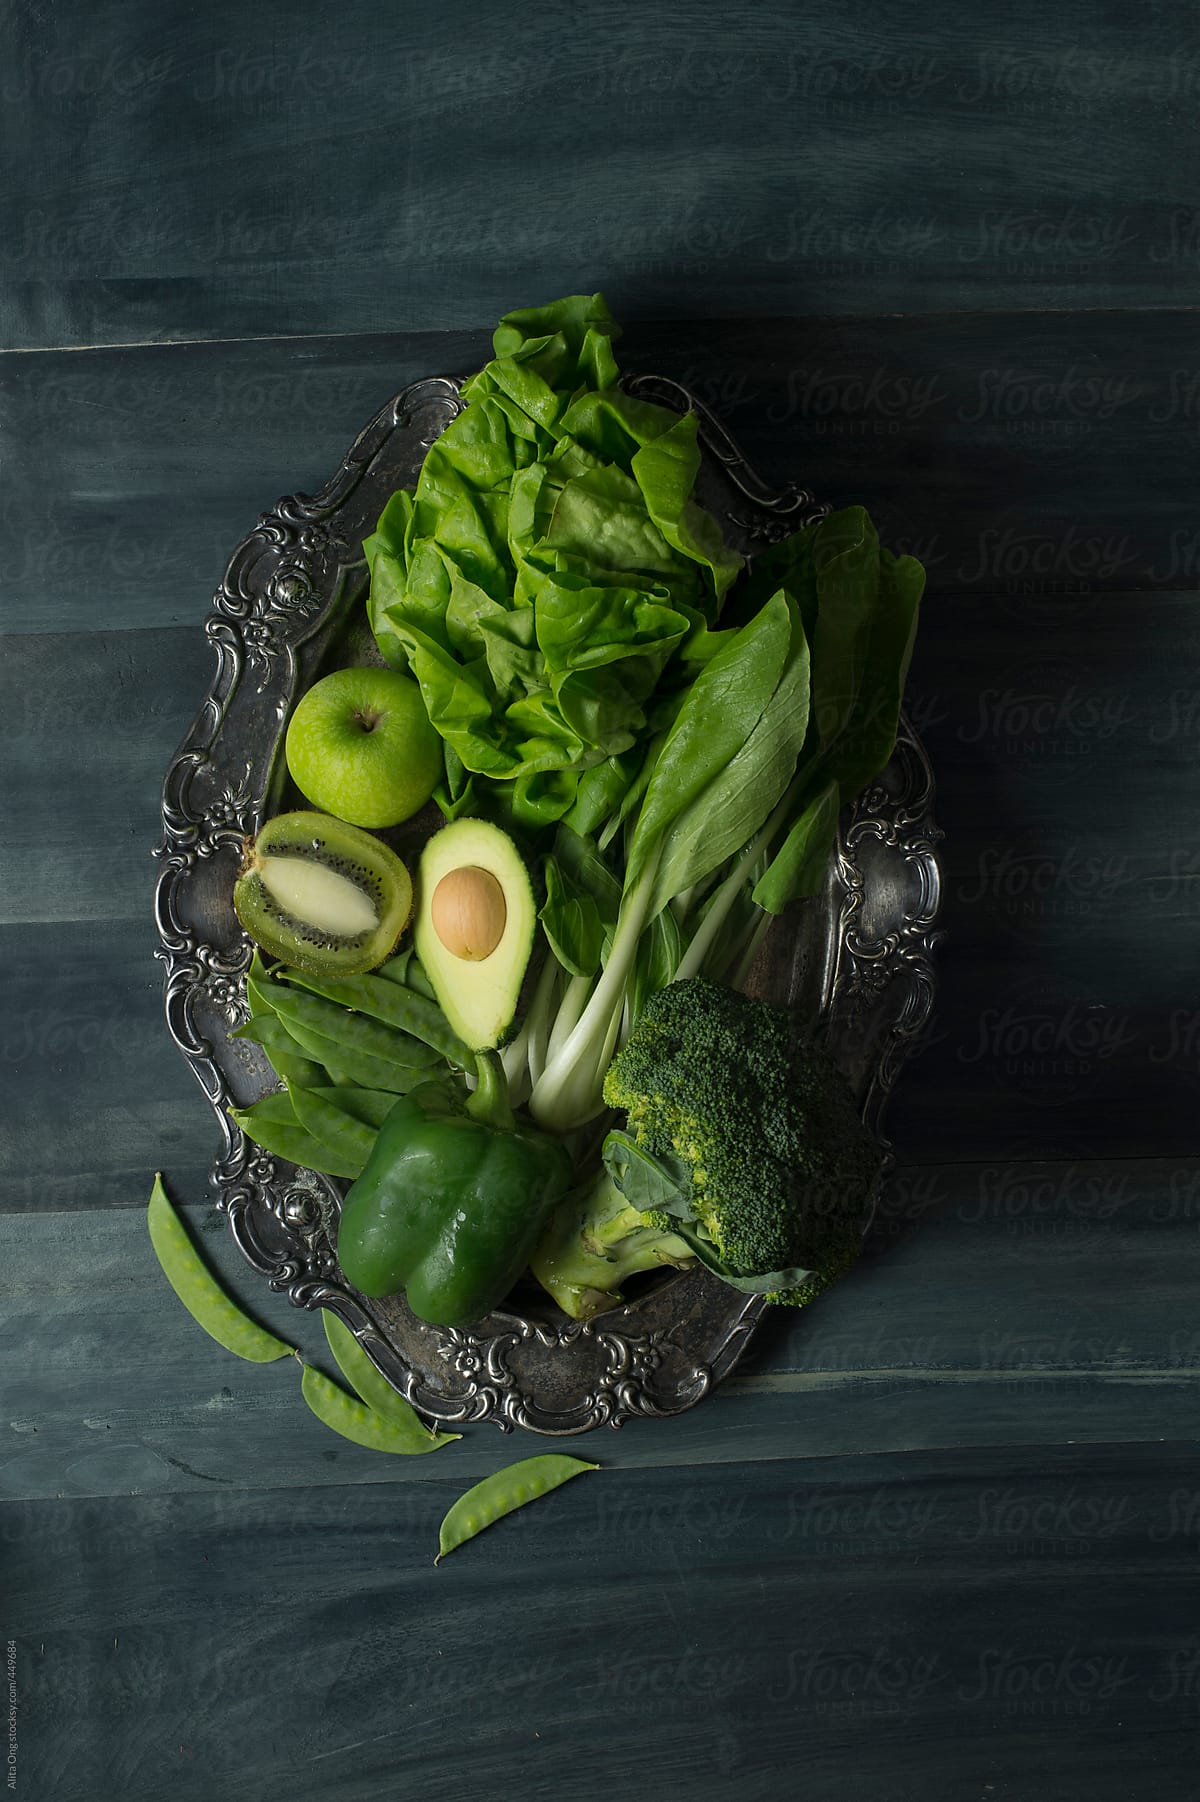 Green fruits and vegetables on rustic metal tray